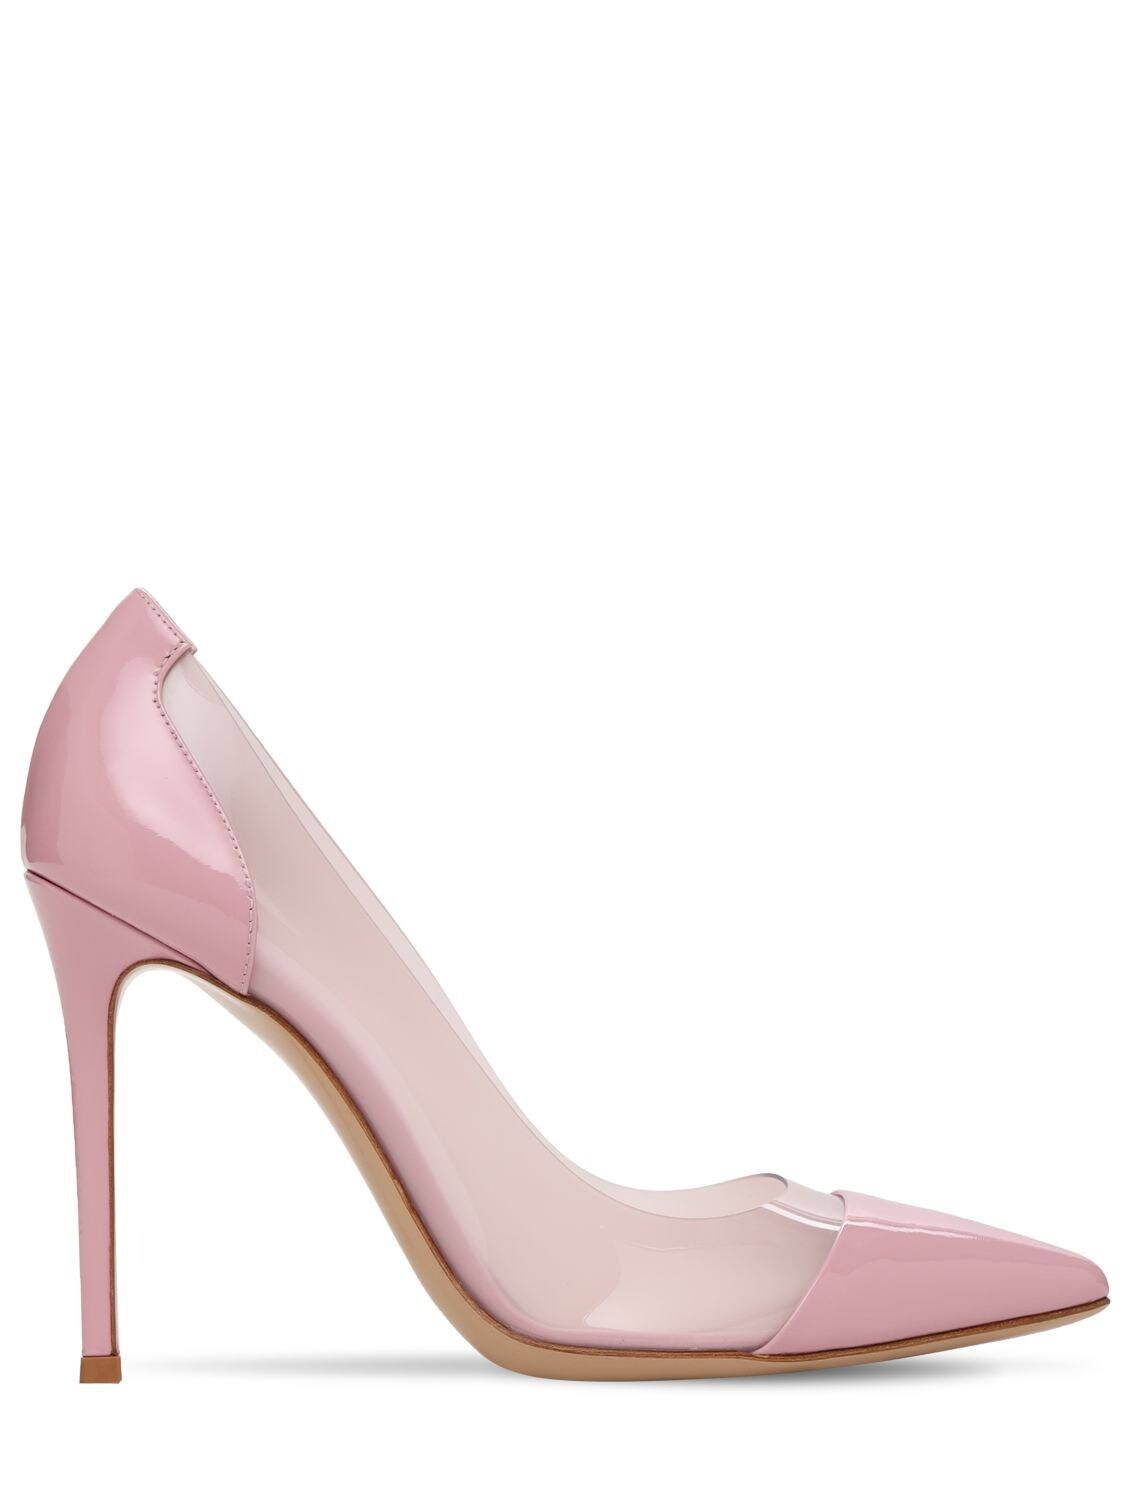 Gianvito Rossi 105mm Plexi & Patent Leather Pumps In Pink